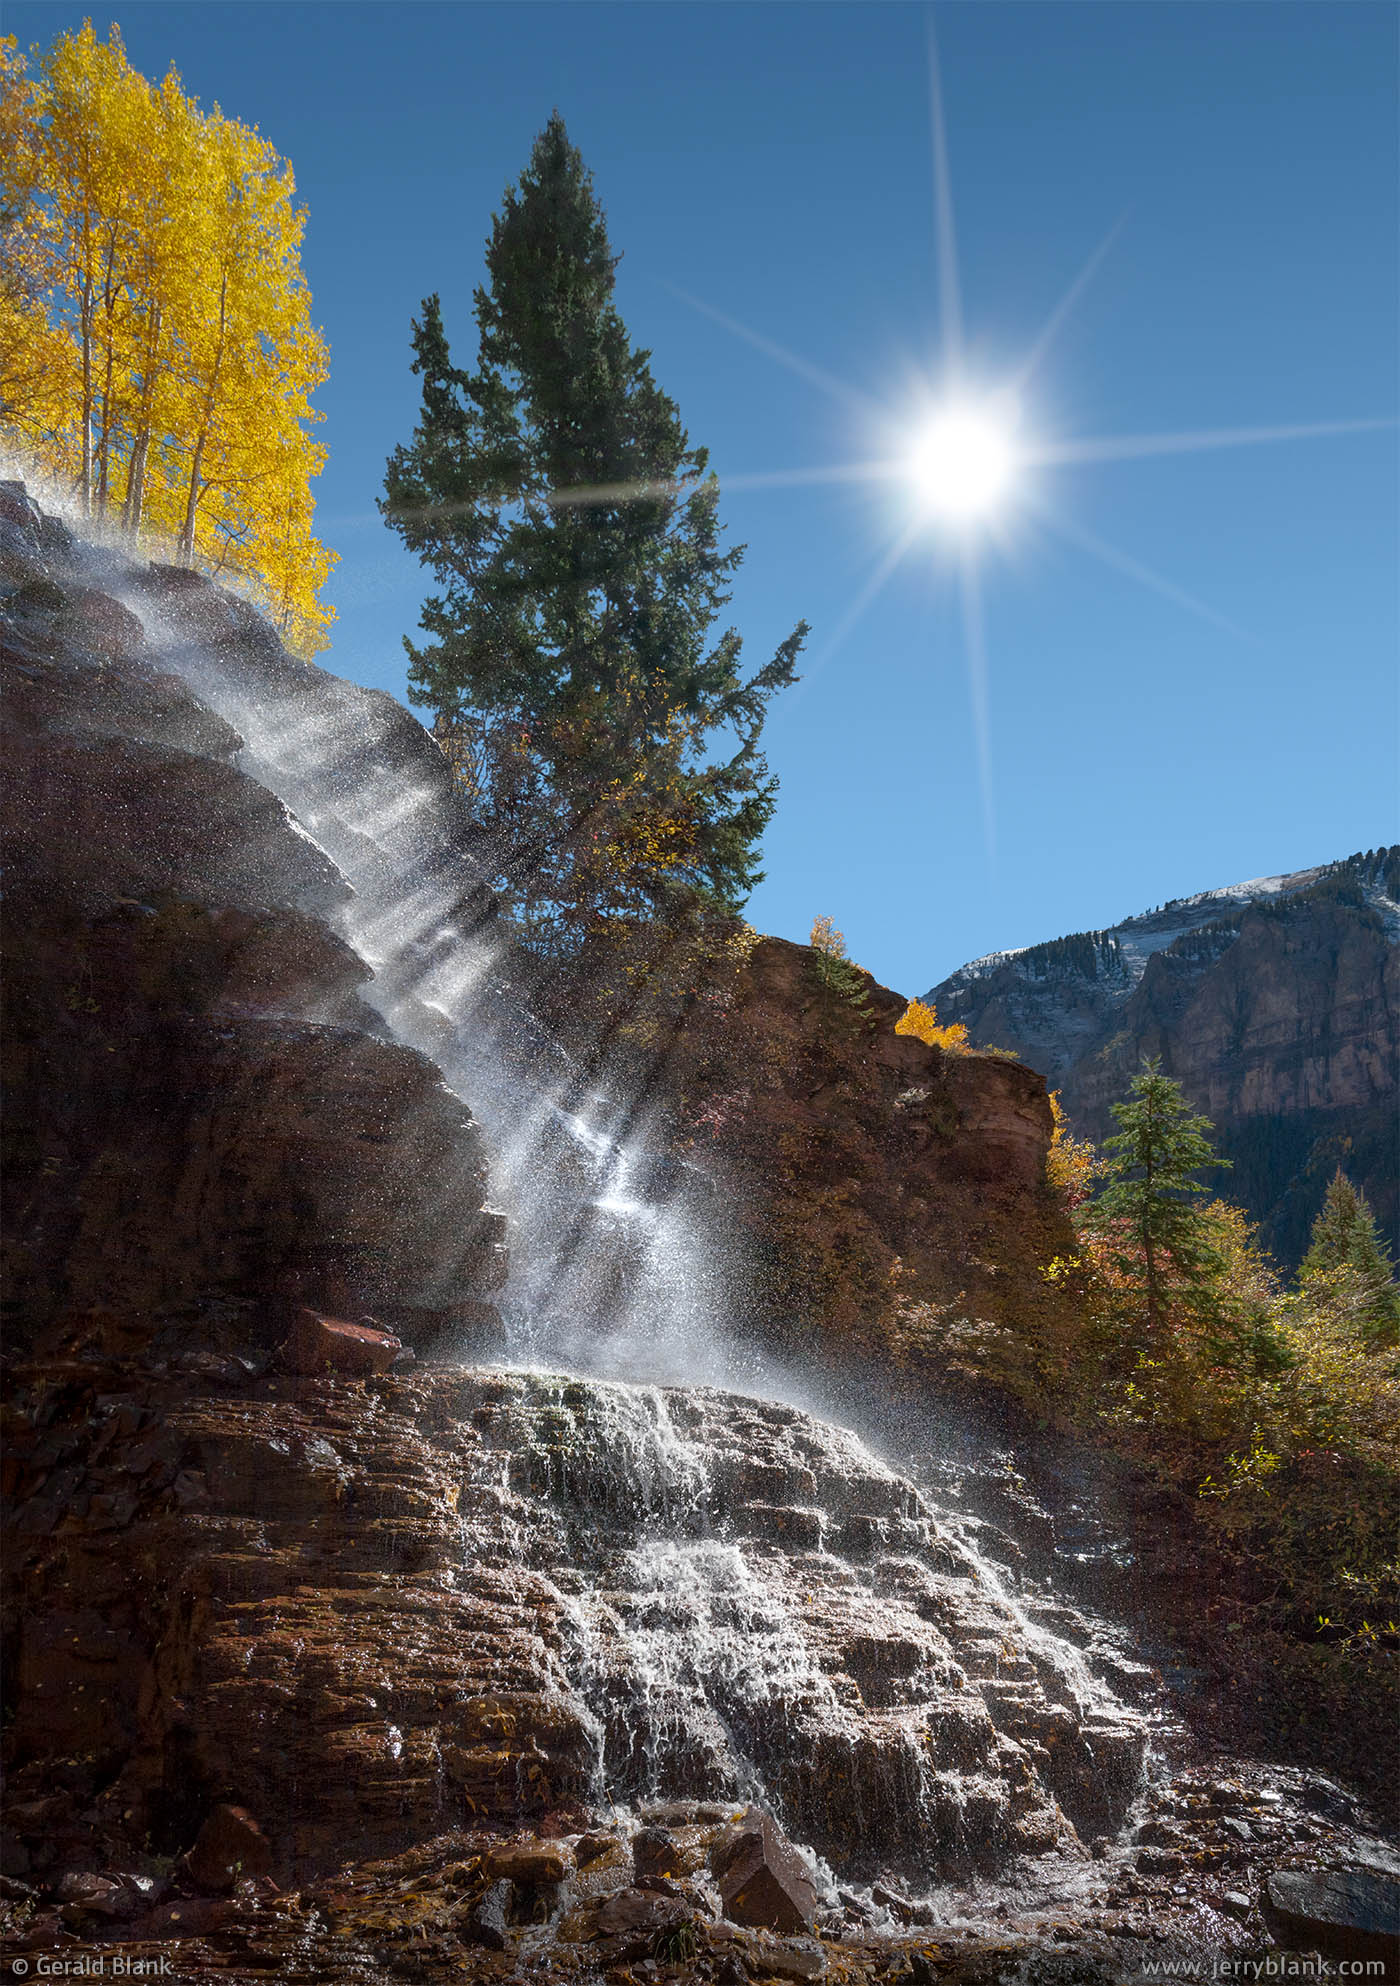 #06918 - Water sprayed from a flume above Marshall Creek is caught by the rays of the sun, outside of Telluride, Colorado - photo by Jerry Blank